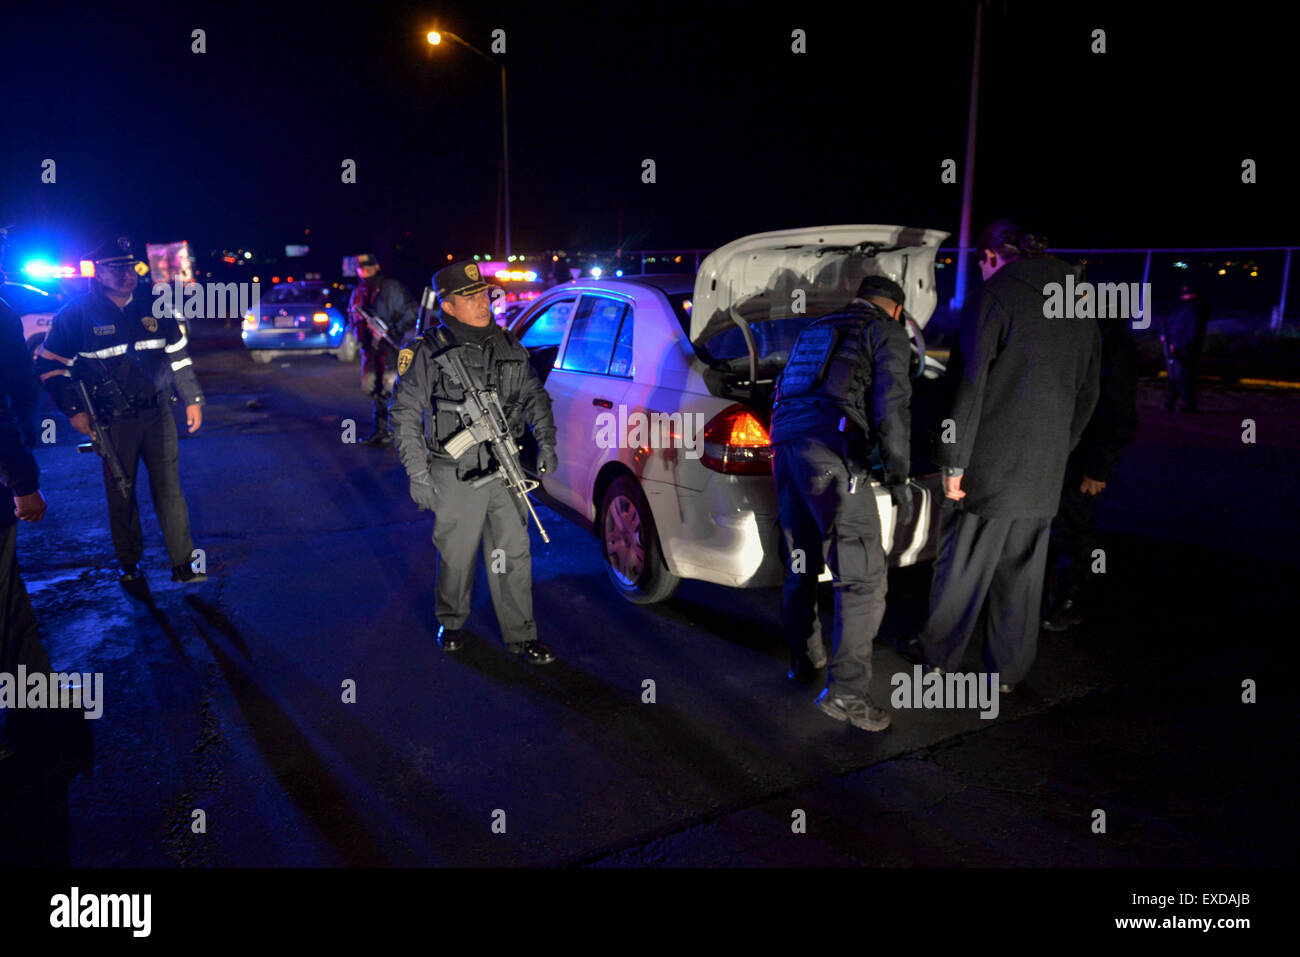 Almoloya De Juarez, Mexico. 12th July, 2015. Public security forces of the Mexico State inspect a vehicle during a search operation near the Altiplano Prision, in Almoloya de Juarez, Mexico State, Mexico. Drug cartel kingpin Joaquin 'El Chapo' Guzman, head of the Sinaloa drug cartel, disappeared from the maximum-security Altiplano prison outside Mexico City Saturday night, according to the National Security Commission. Credit:  Mario Vazquez/MVT/Xinhua/Alamy Live News Stock Photo